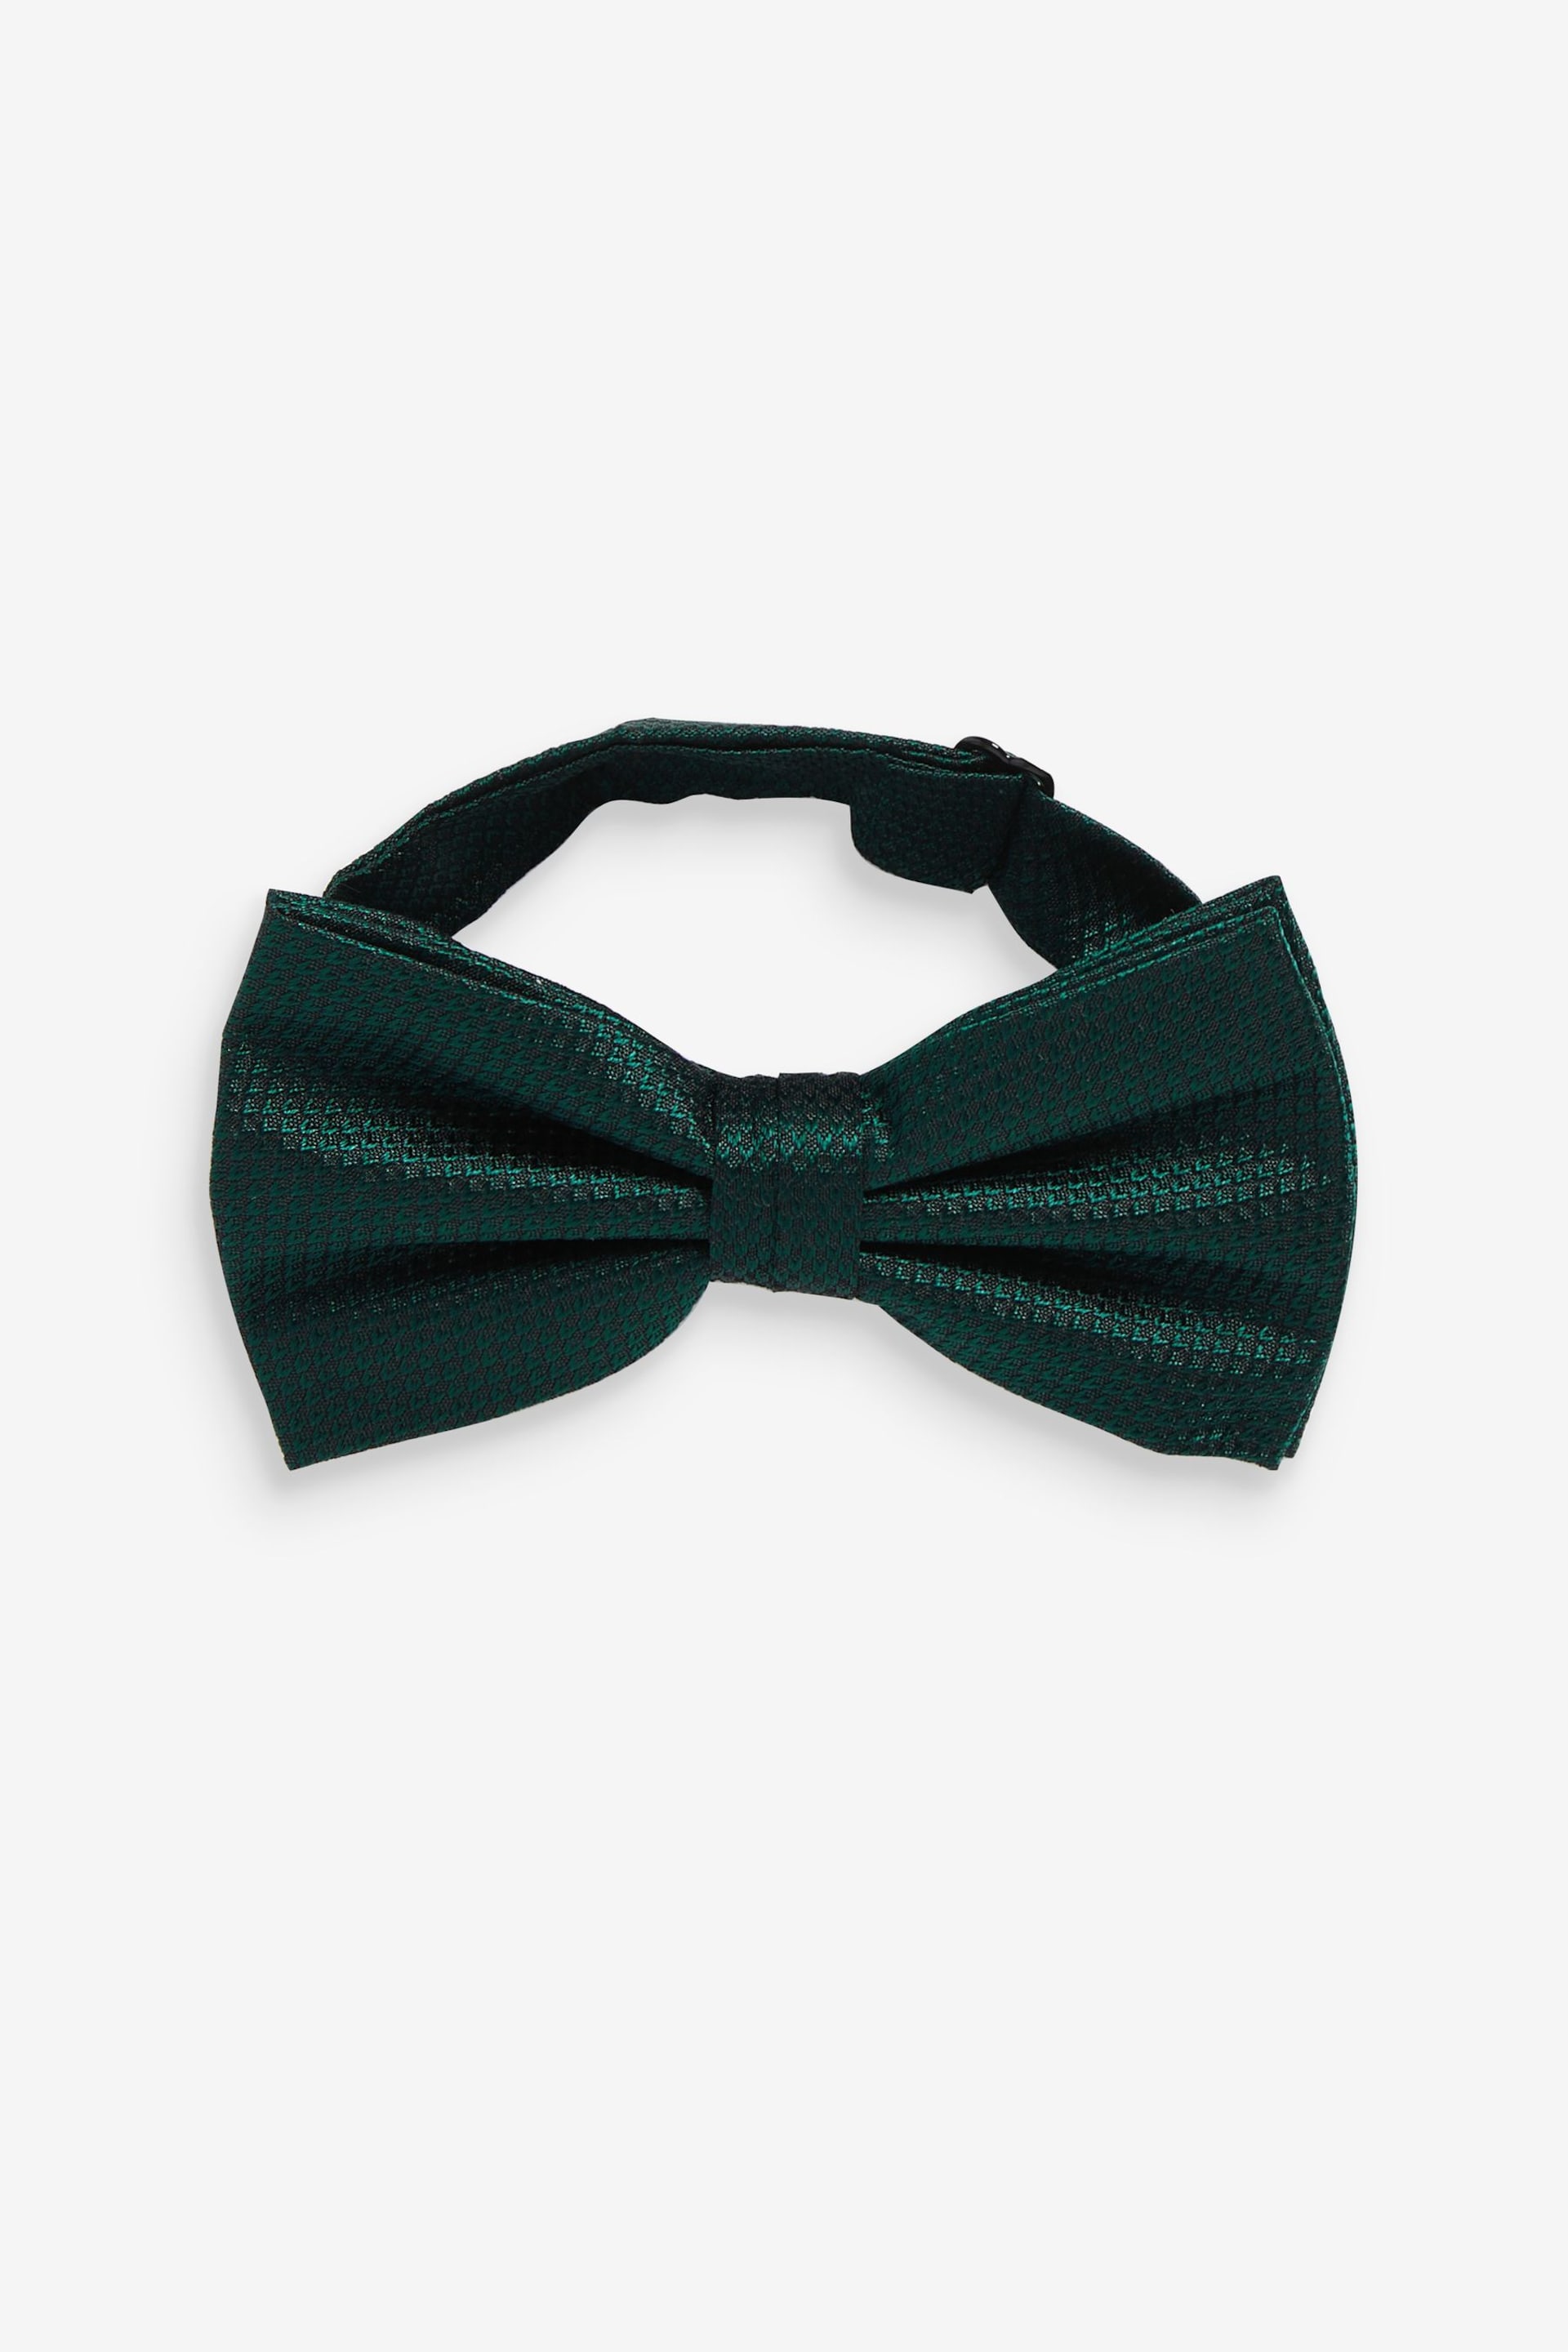 Forest Green Textured Silk Bow Tie - Image 2 of 4